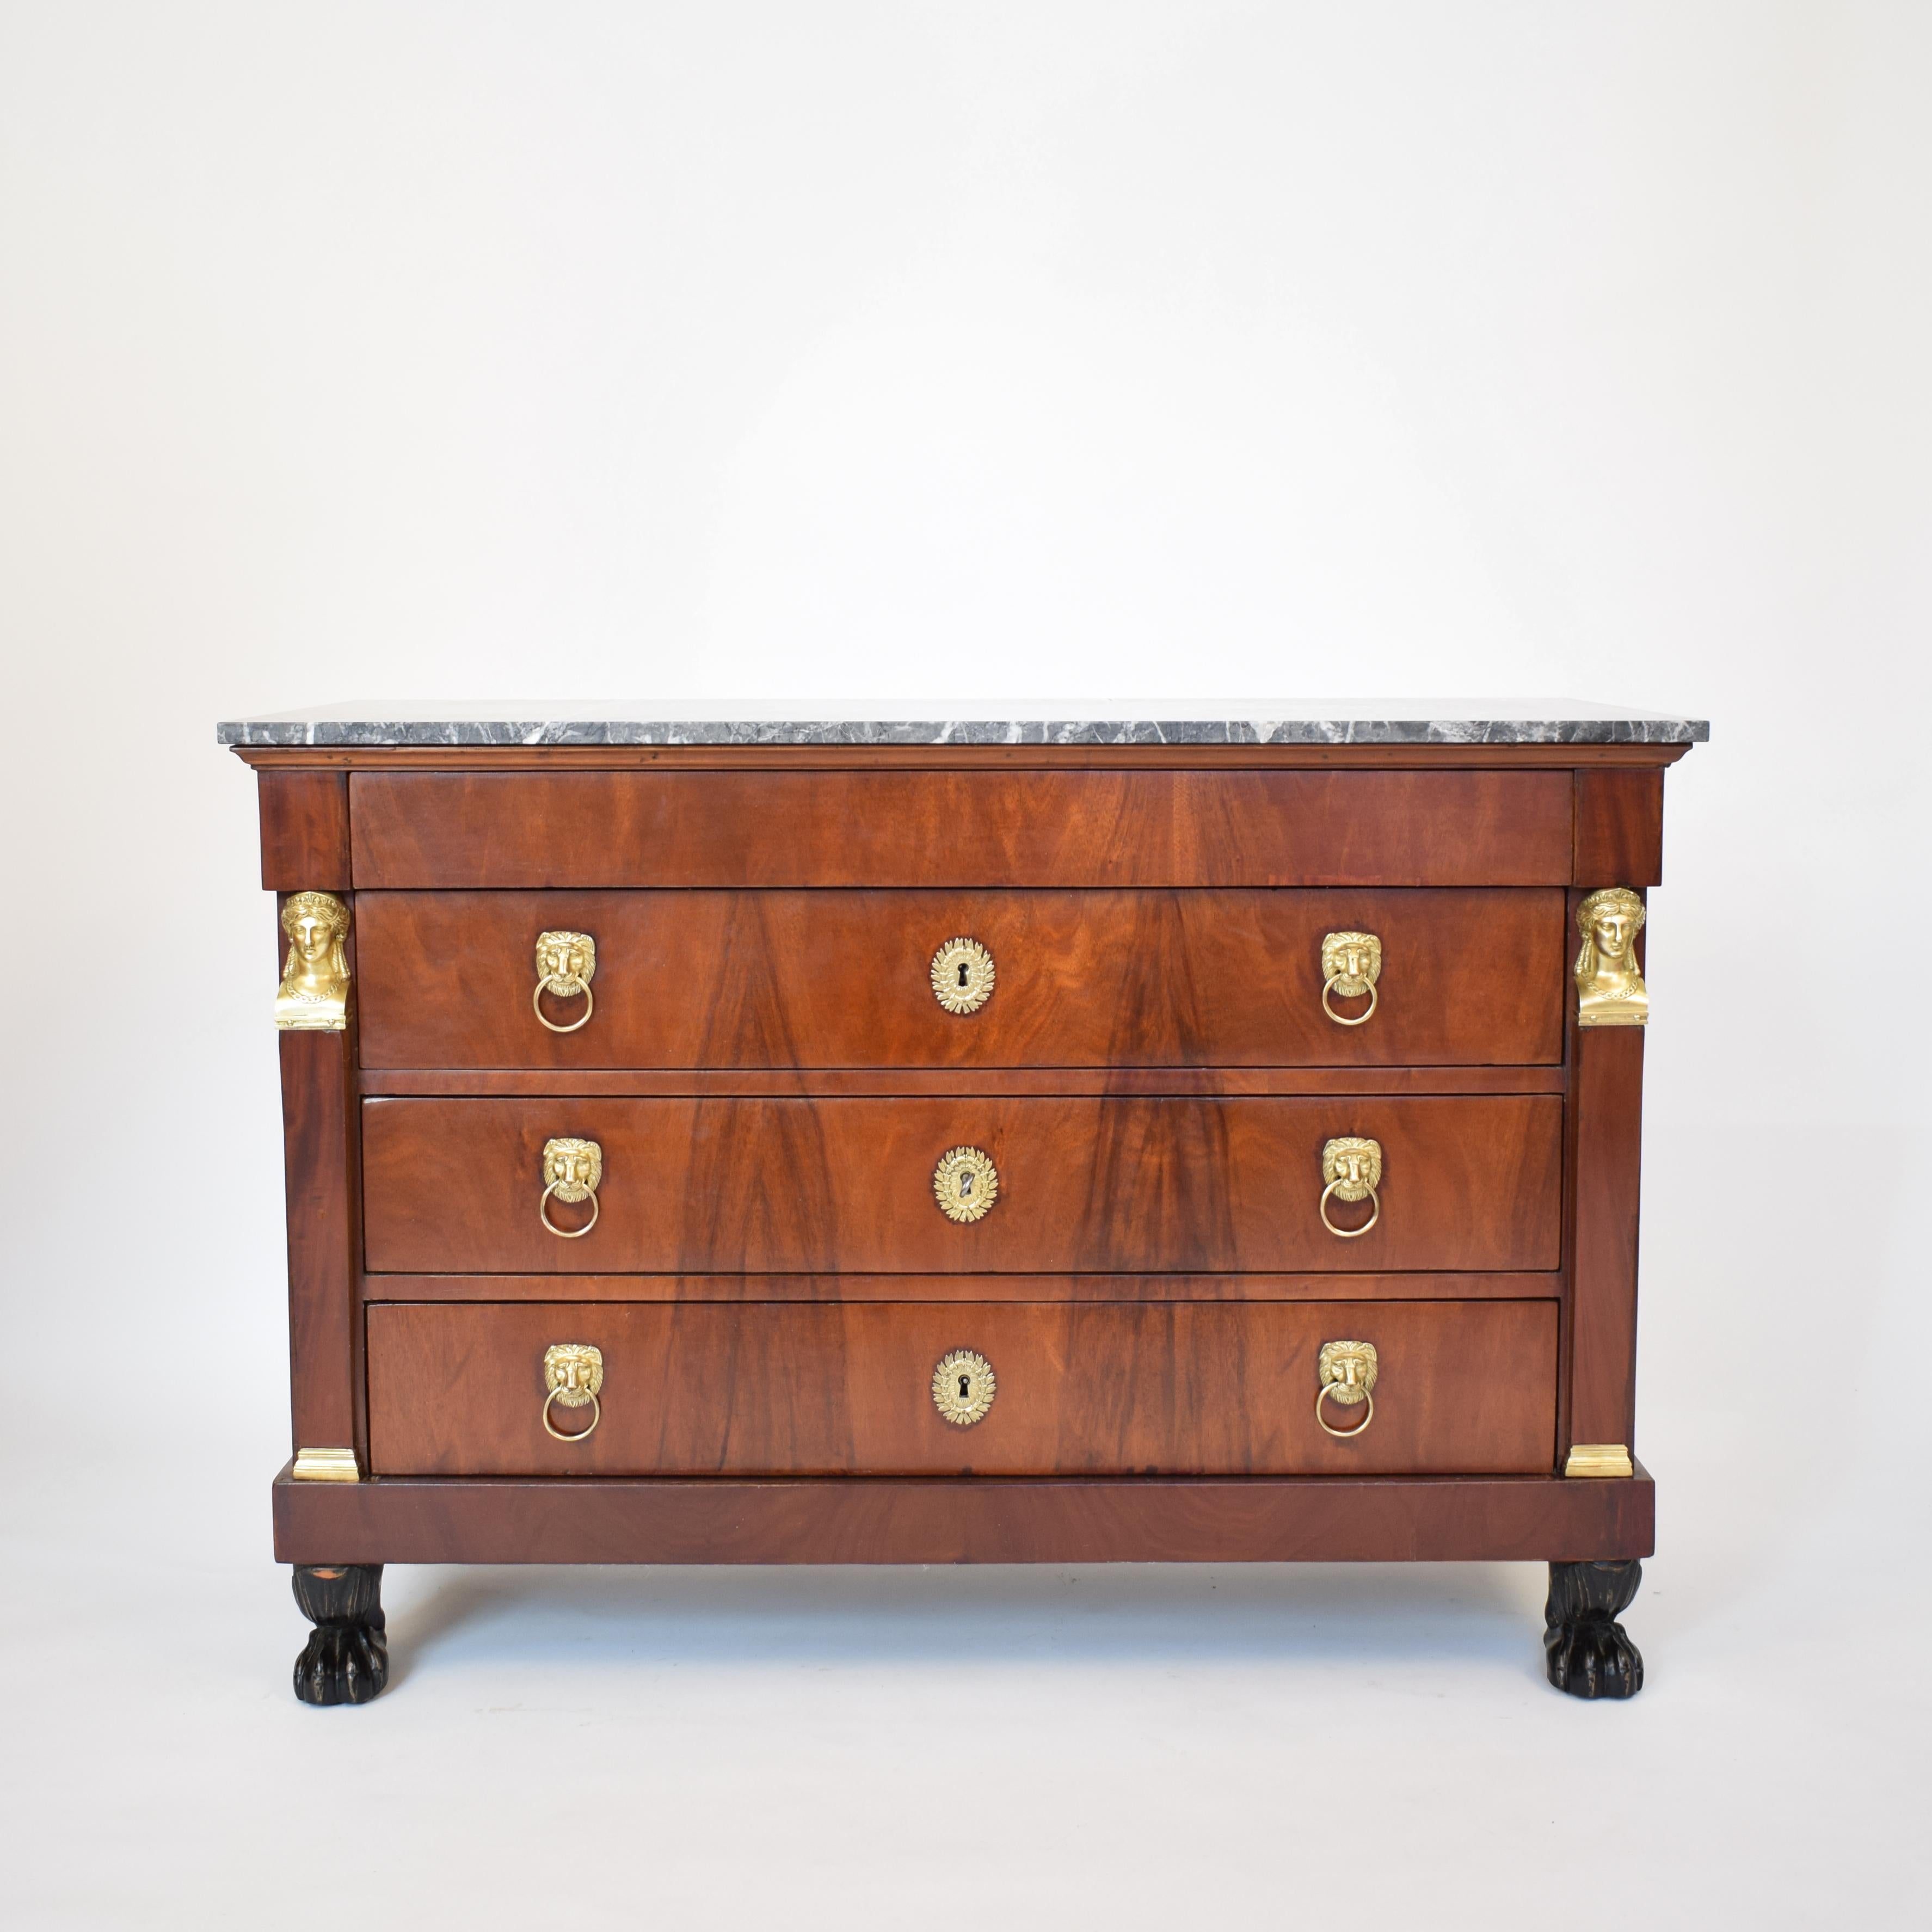 This fine and early 19th century French Empire ormolu-mounted mahogany commode was made circa 1802 in France, probably in Paris.
The brass fittings are from a very high quality and the whole piece is in a very good restored condition.
It still has